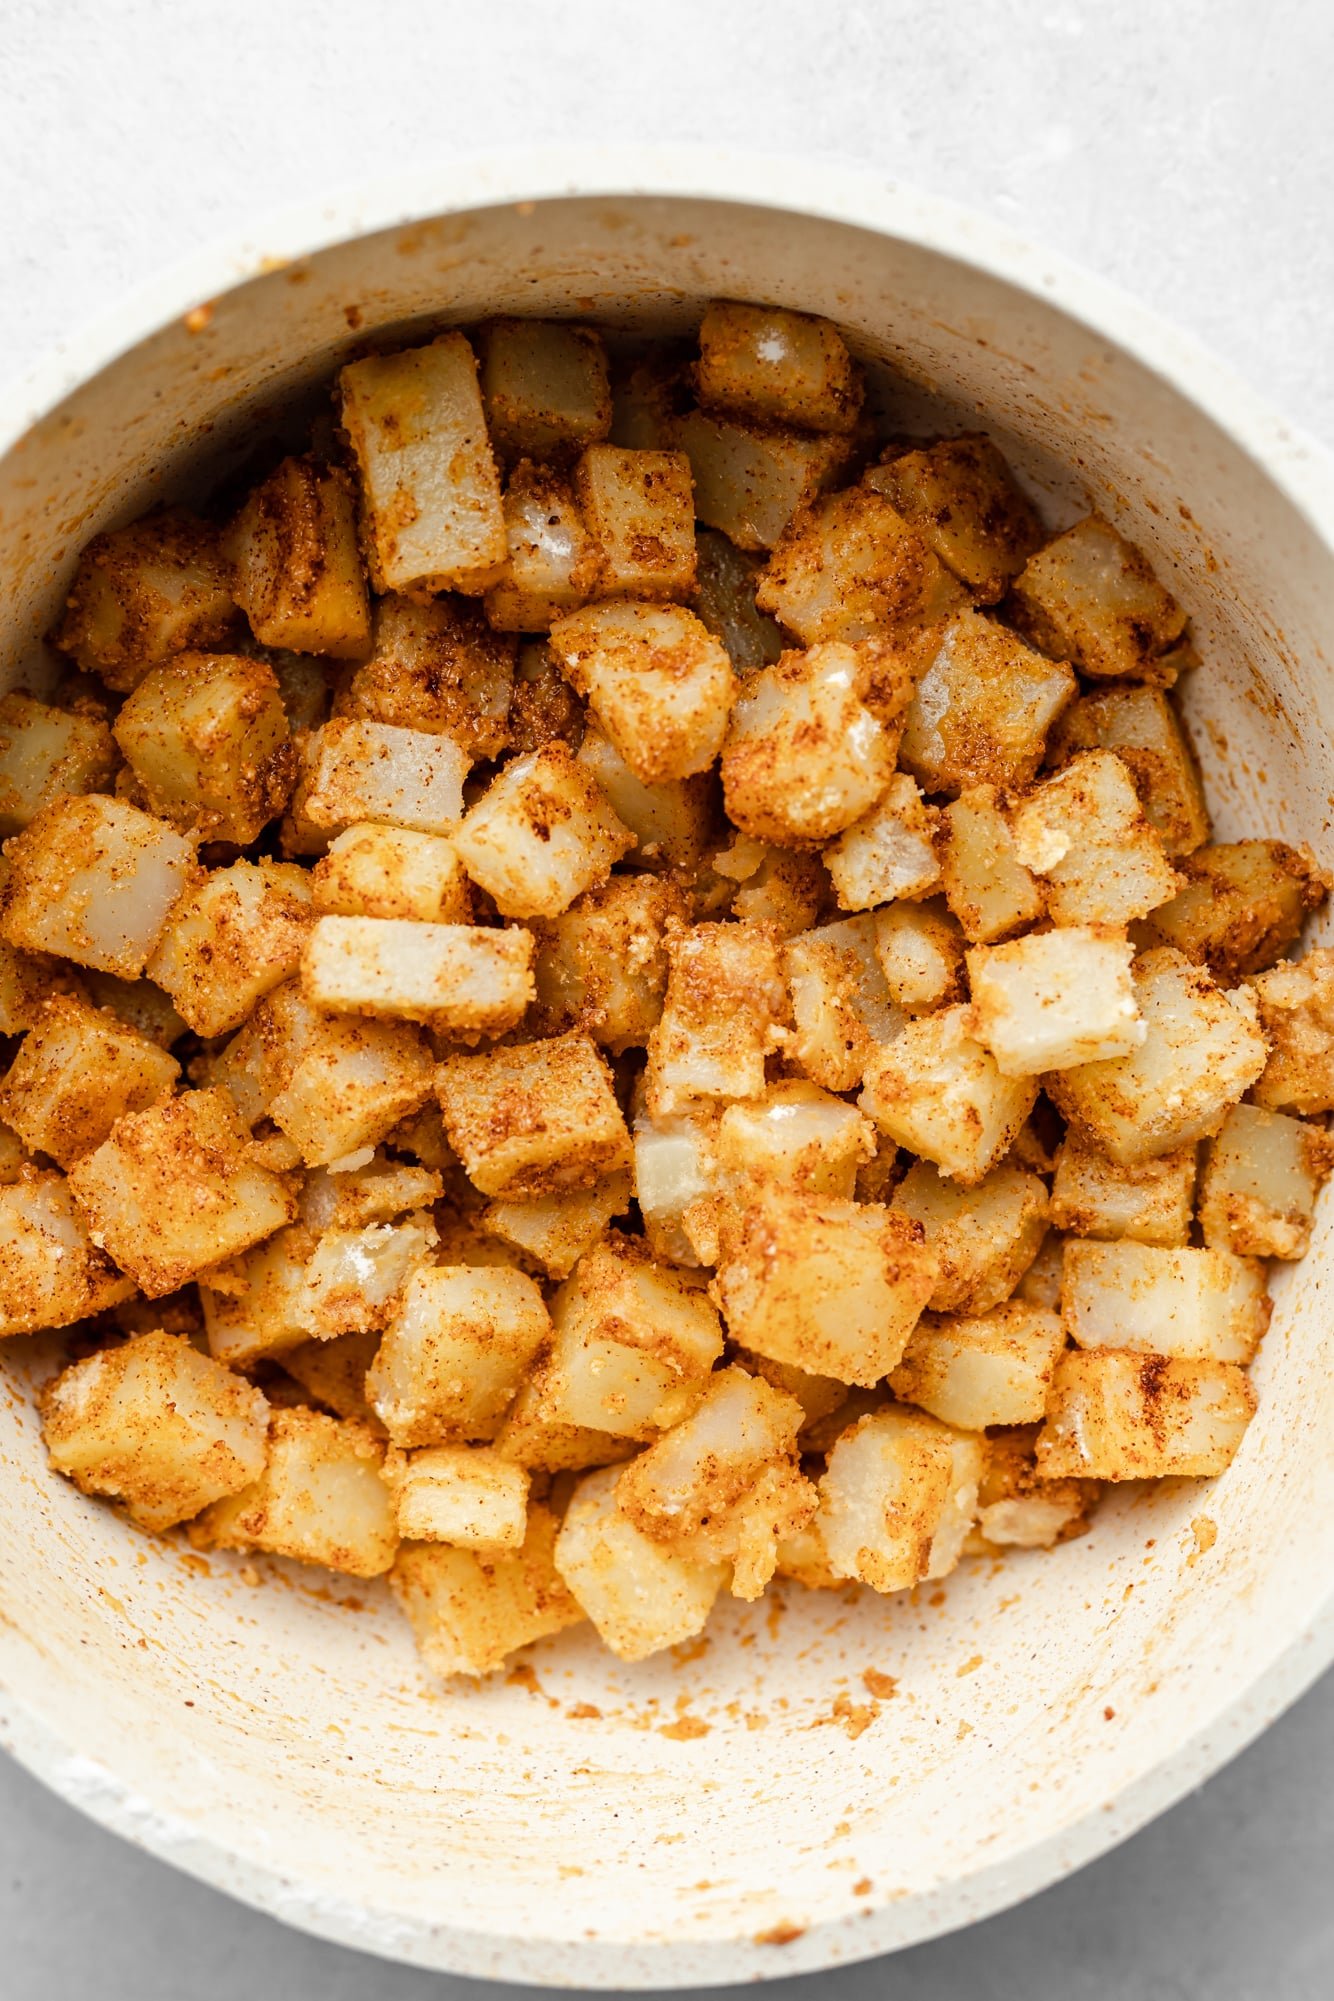 parboiled and seasoned potato chunks in a large white bowl.